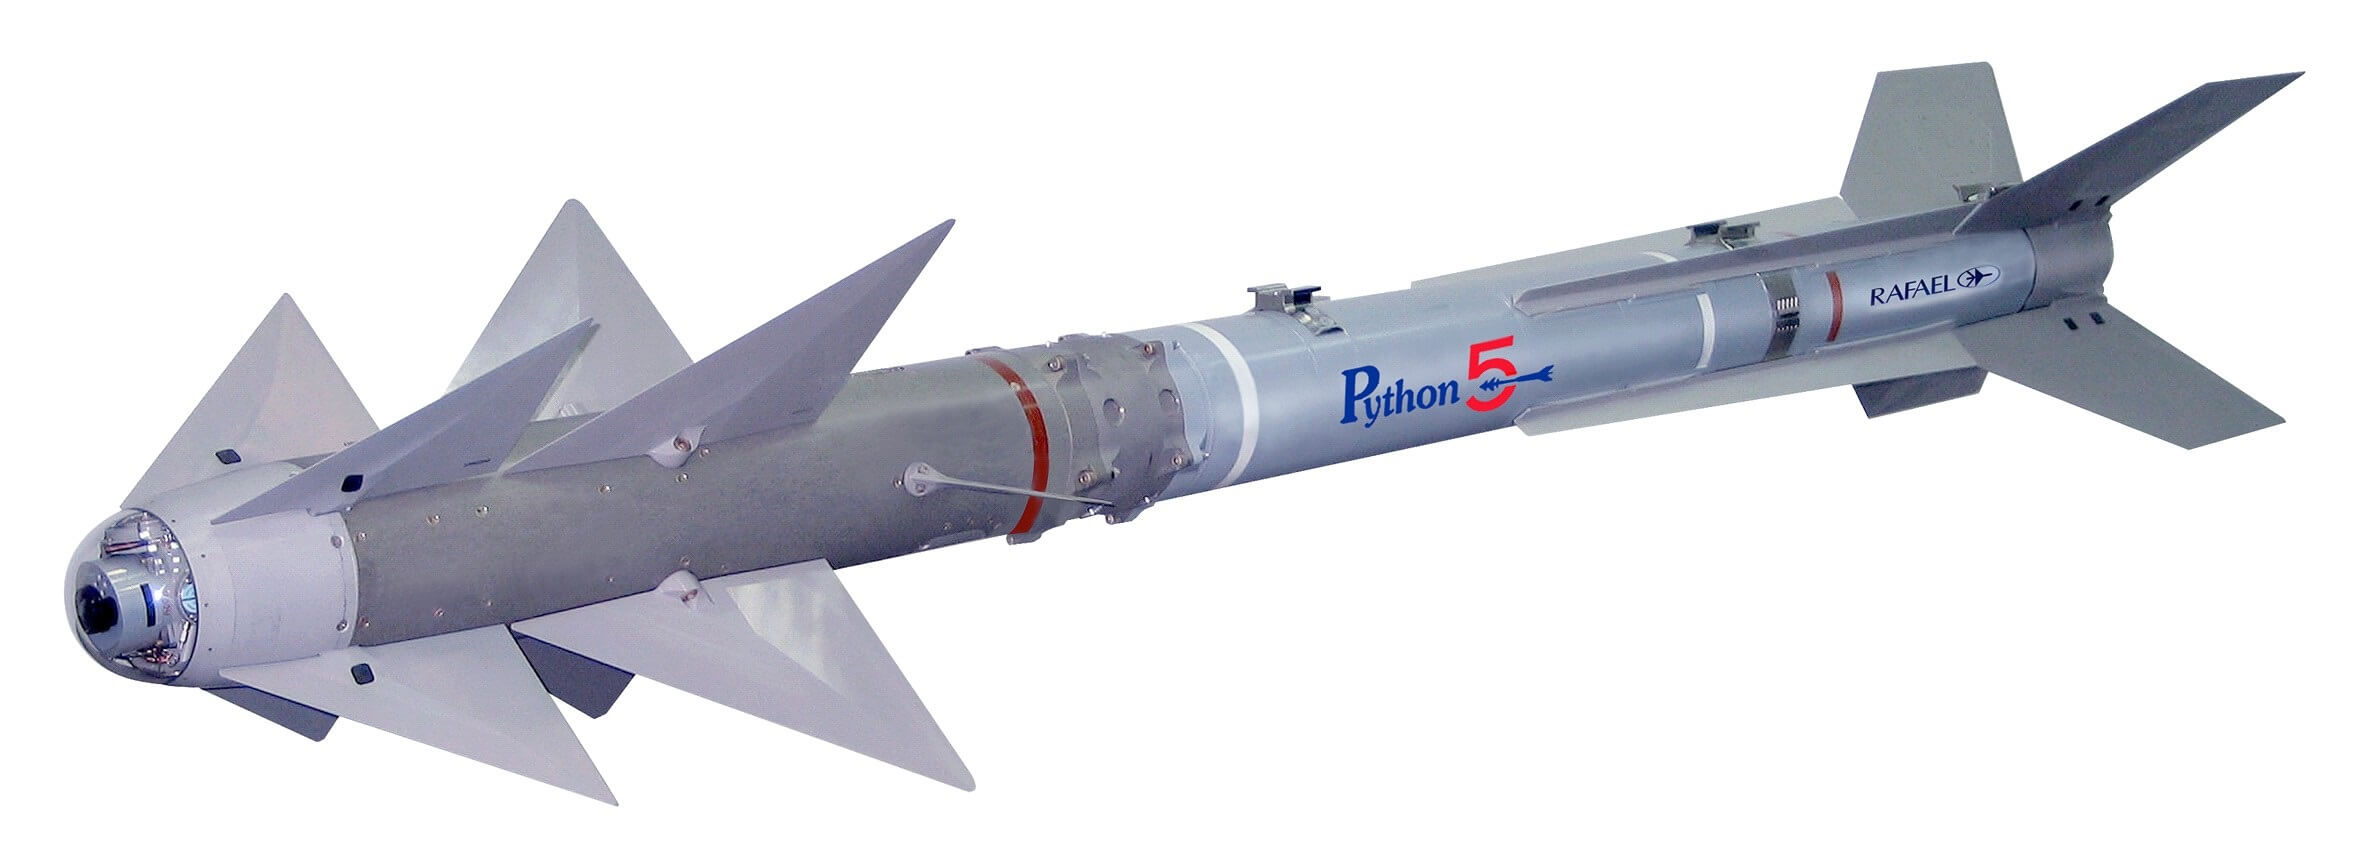 A Python-5 model air-to-air missile manufactured by Rafael. PR photo